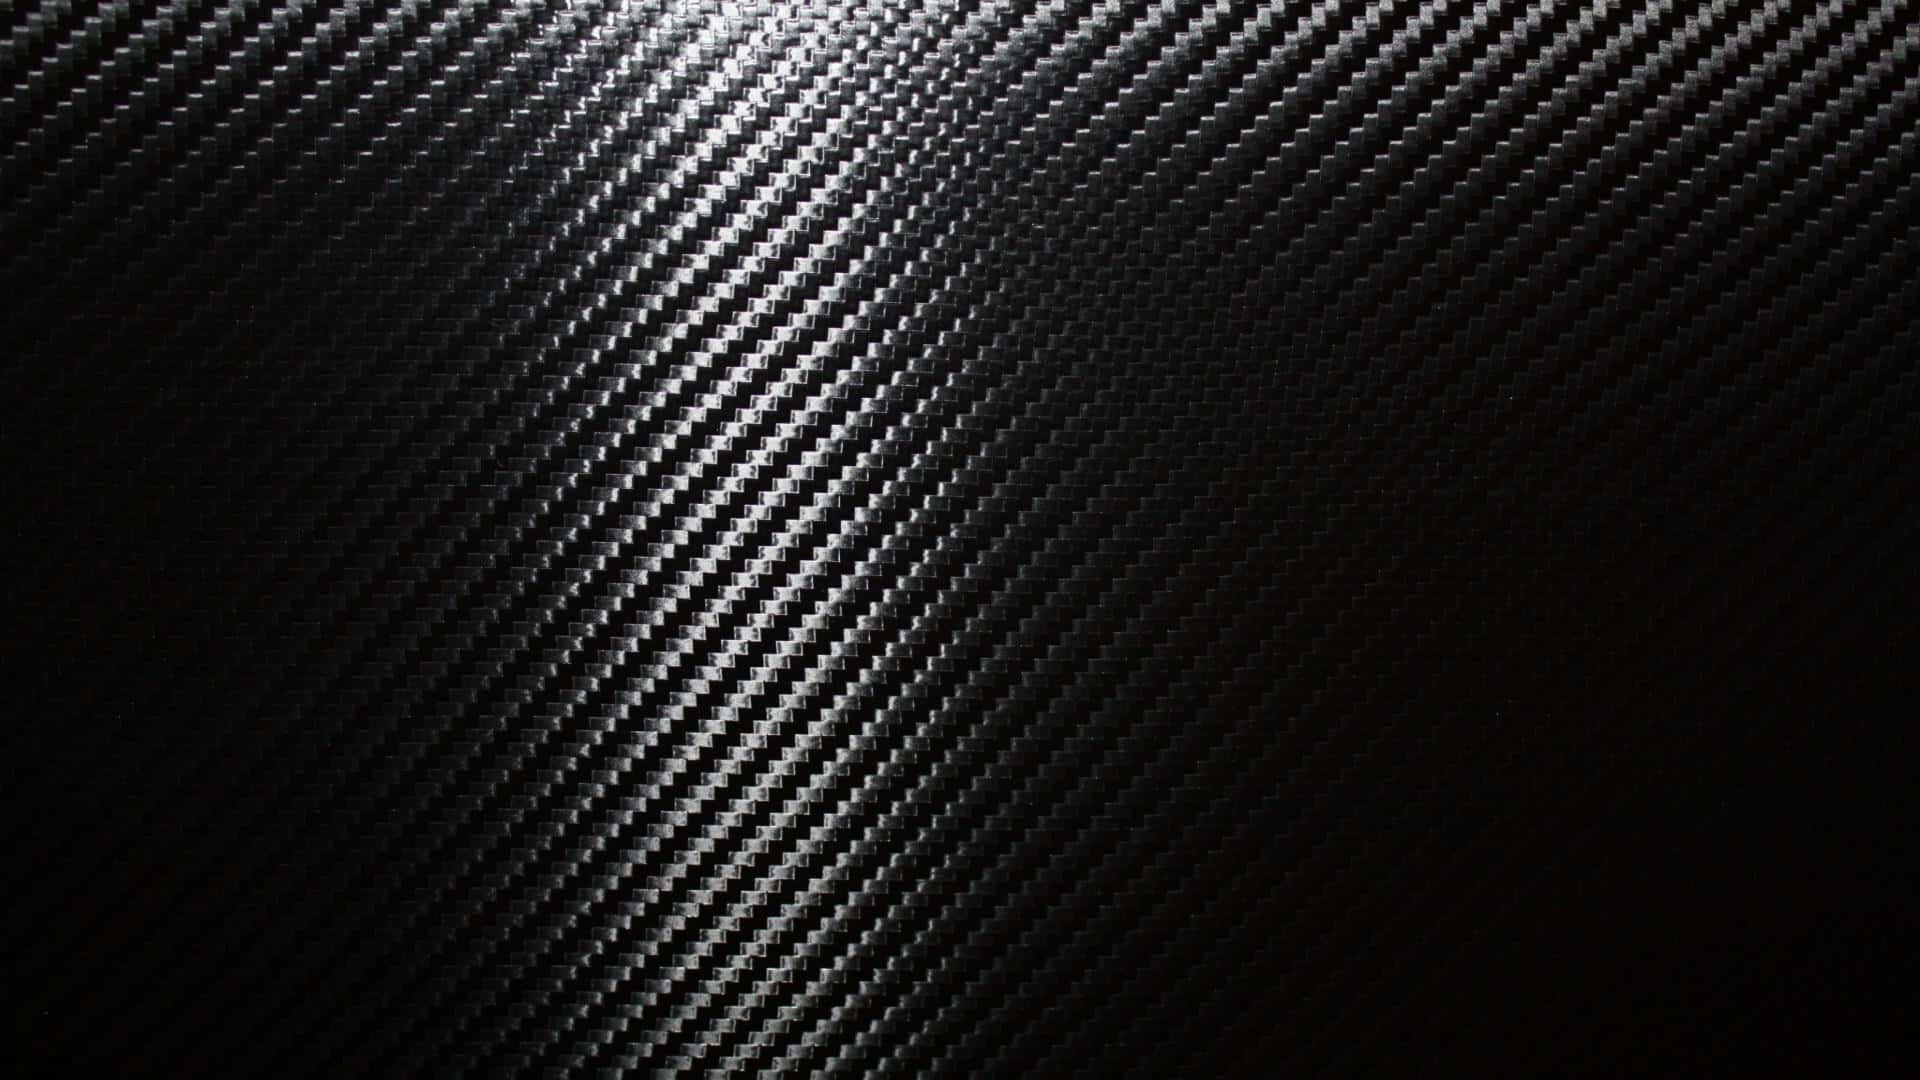 A close-up view of black carbon fiber in a luxurious pattern Wallpaper